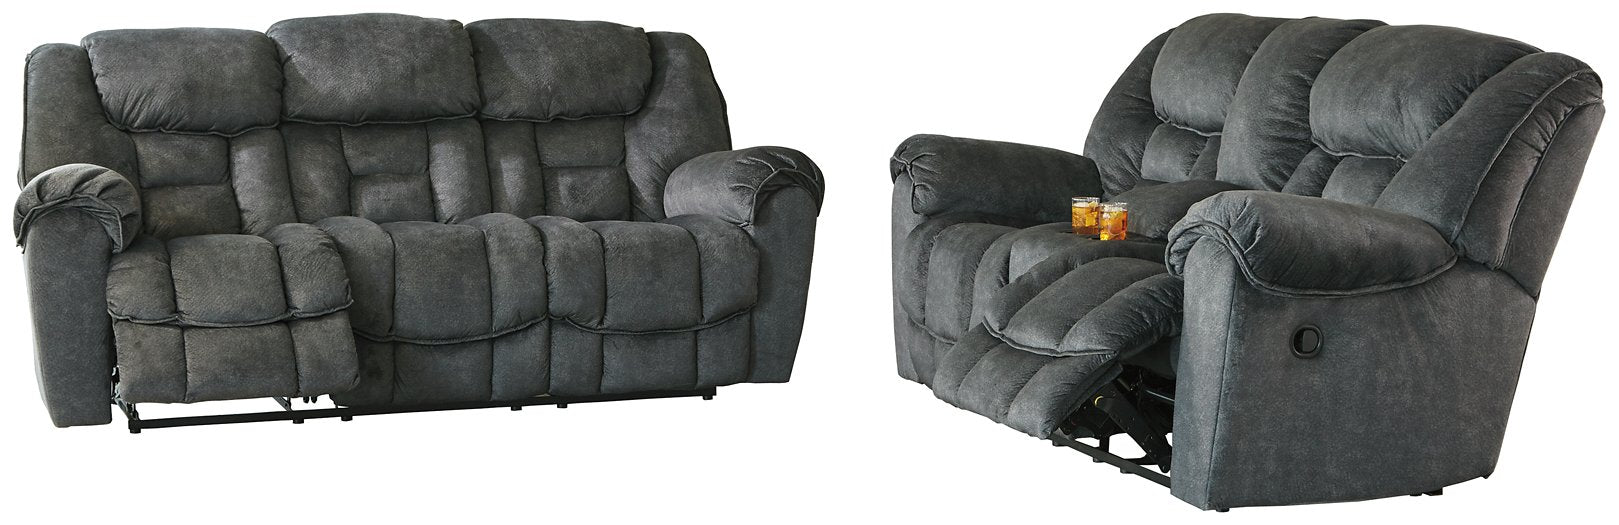 Capehorn Upholstery Package